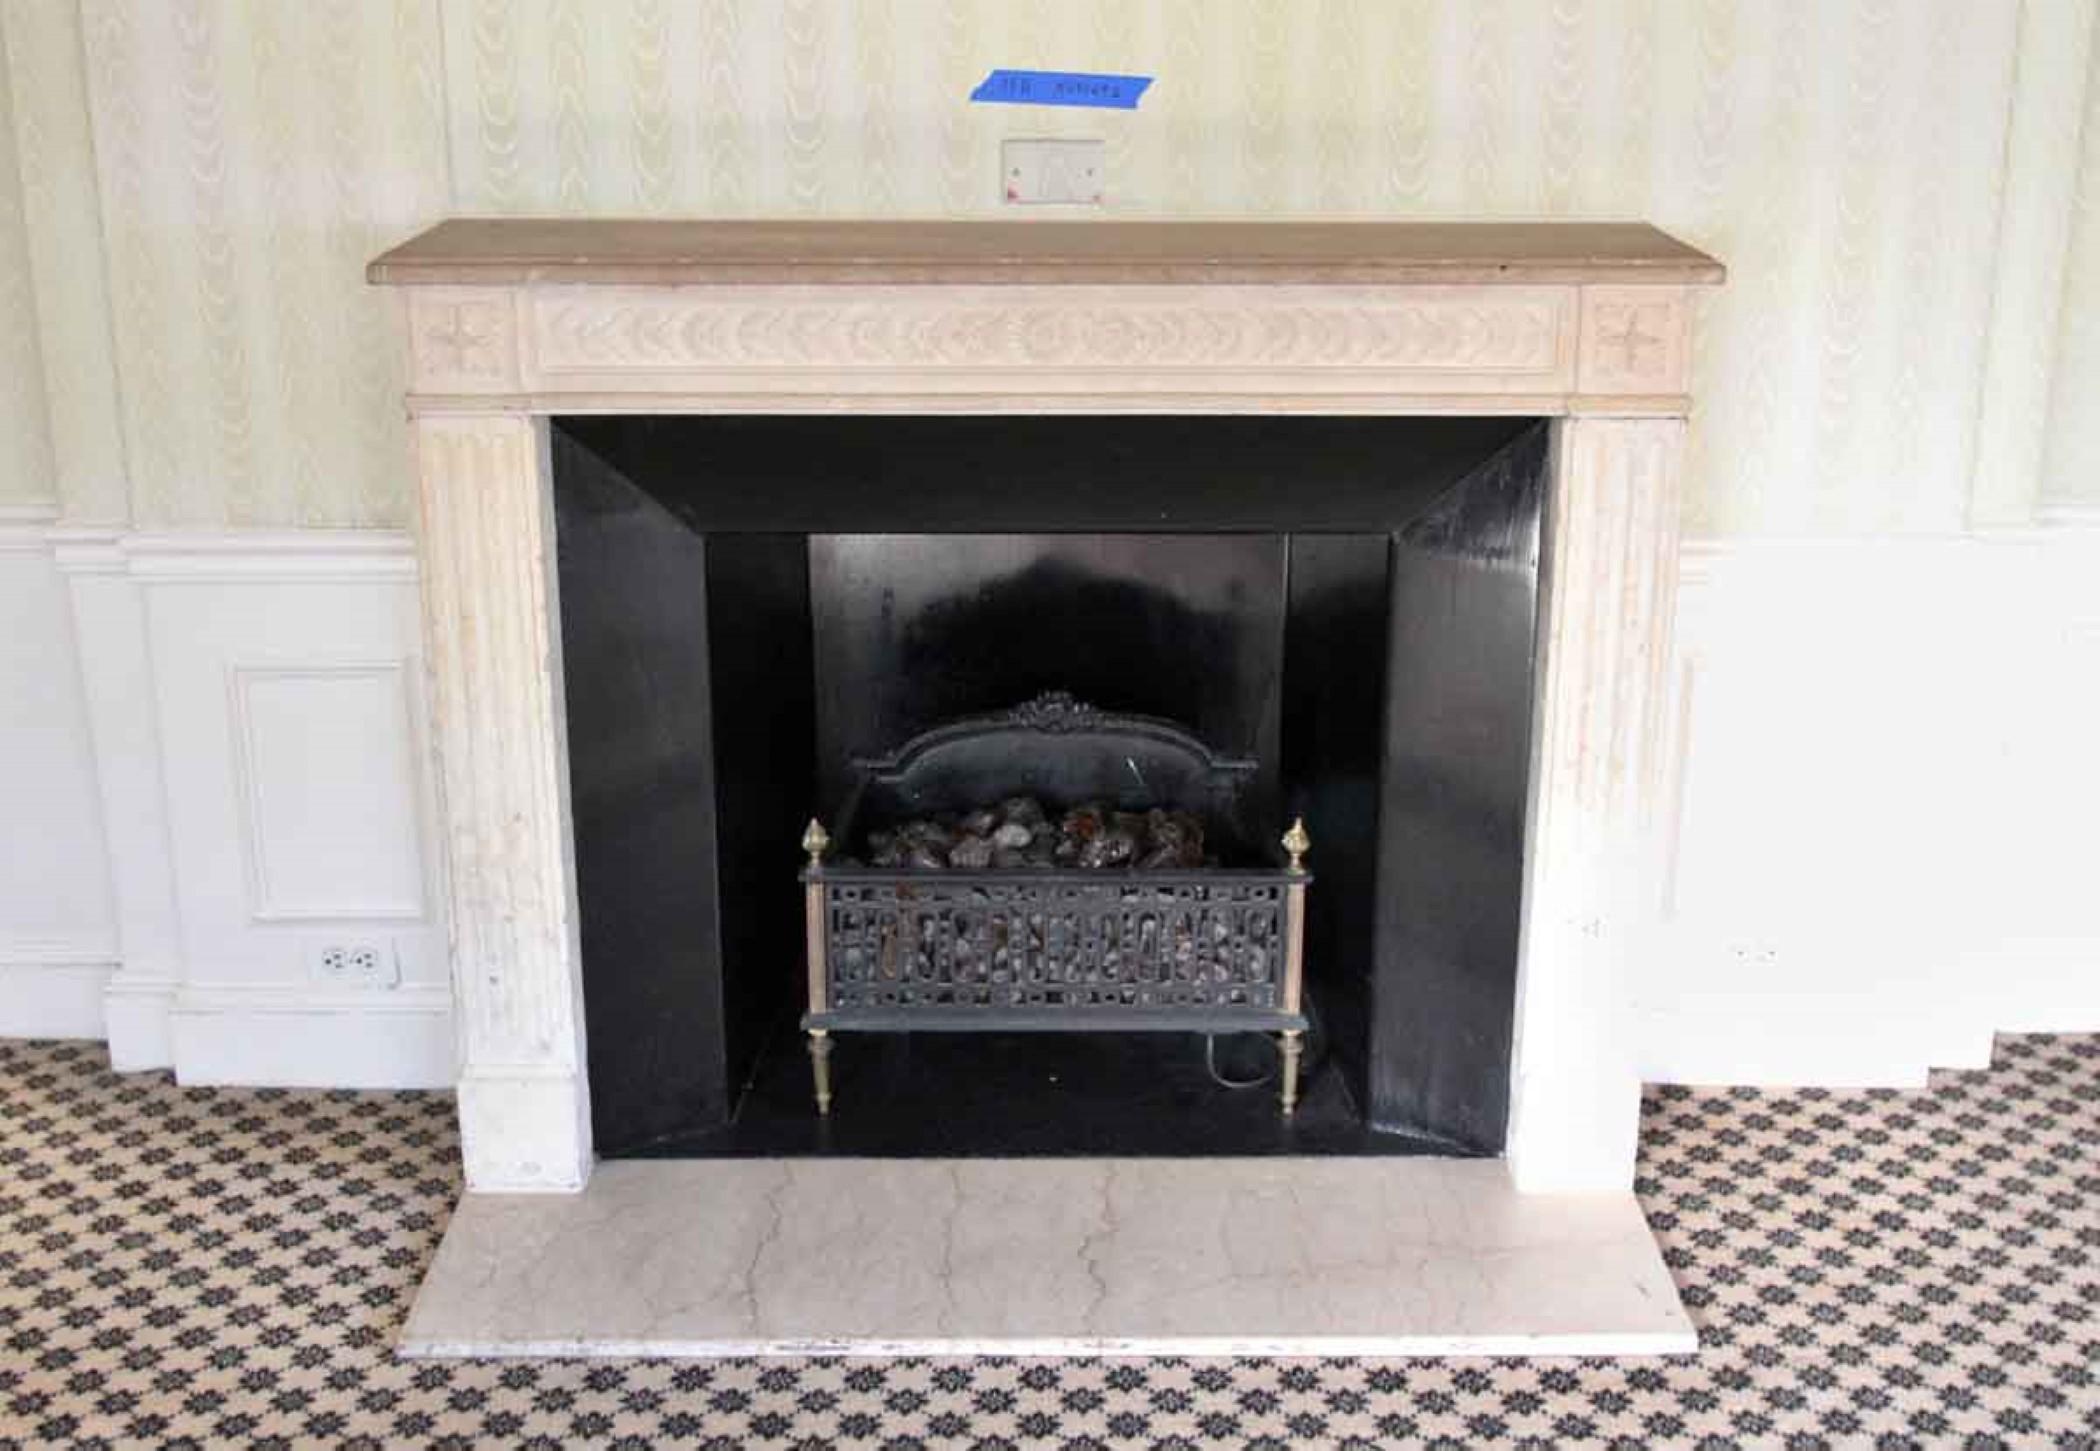 19th Century French made Louis XVI carved limestone mantel with a crema marfil marble hearth. This mantel was one of a group of antique mantels imported from Europe and installed in the Waldorf Astoria hotel in the 1930s when the hotel was first